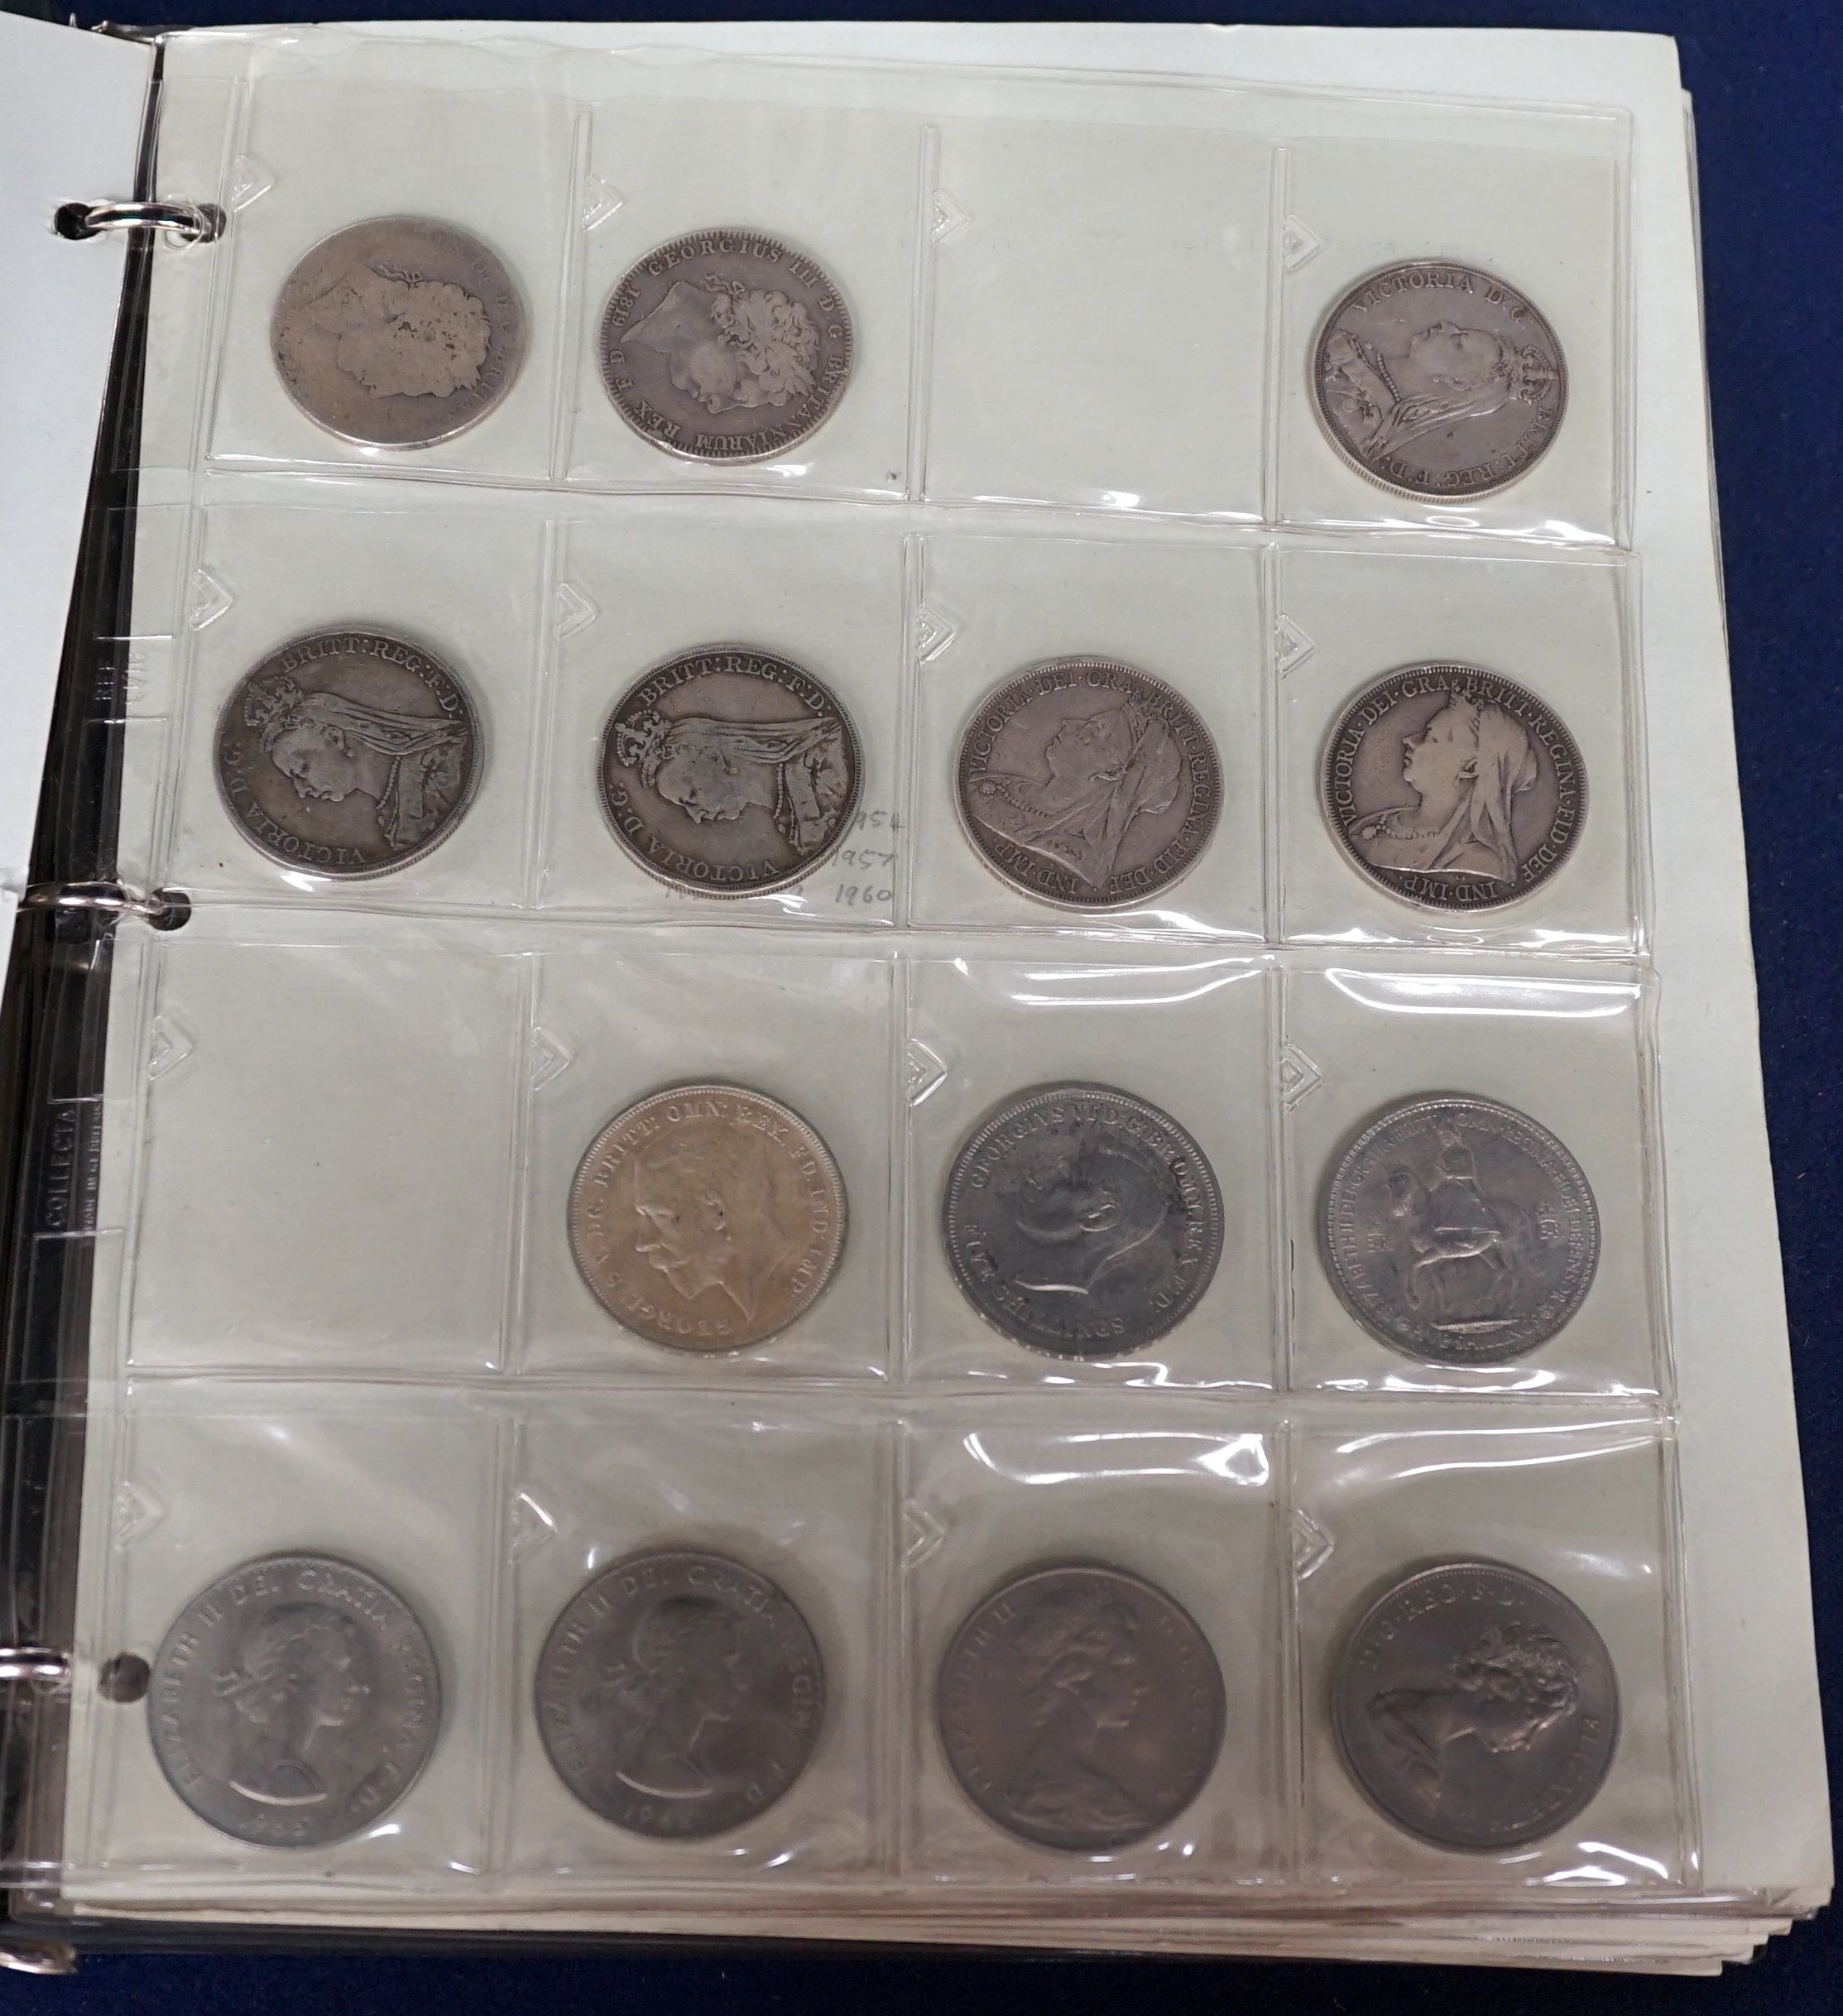 An album of British crowns, halfcrowns, florins and decimal 50 pence and 20 pence coins, including 1819 crown F, etc. and various loose UK coins and banknotes in envelopes